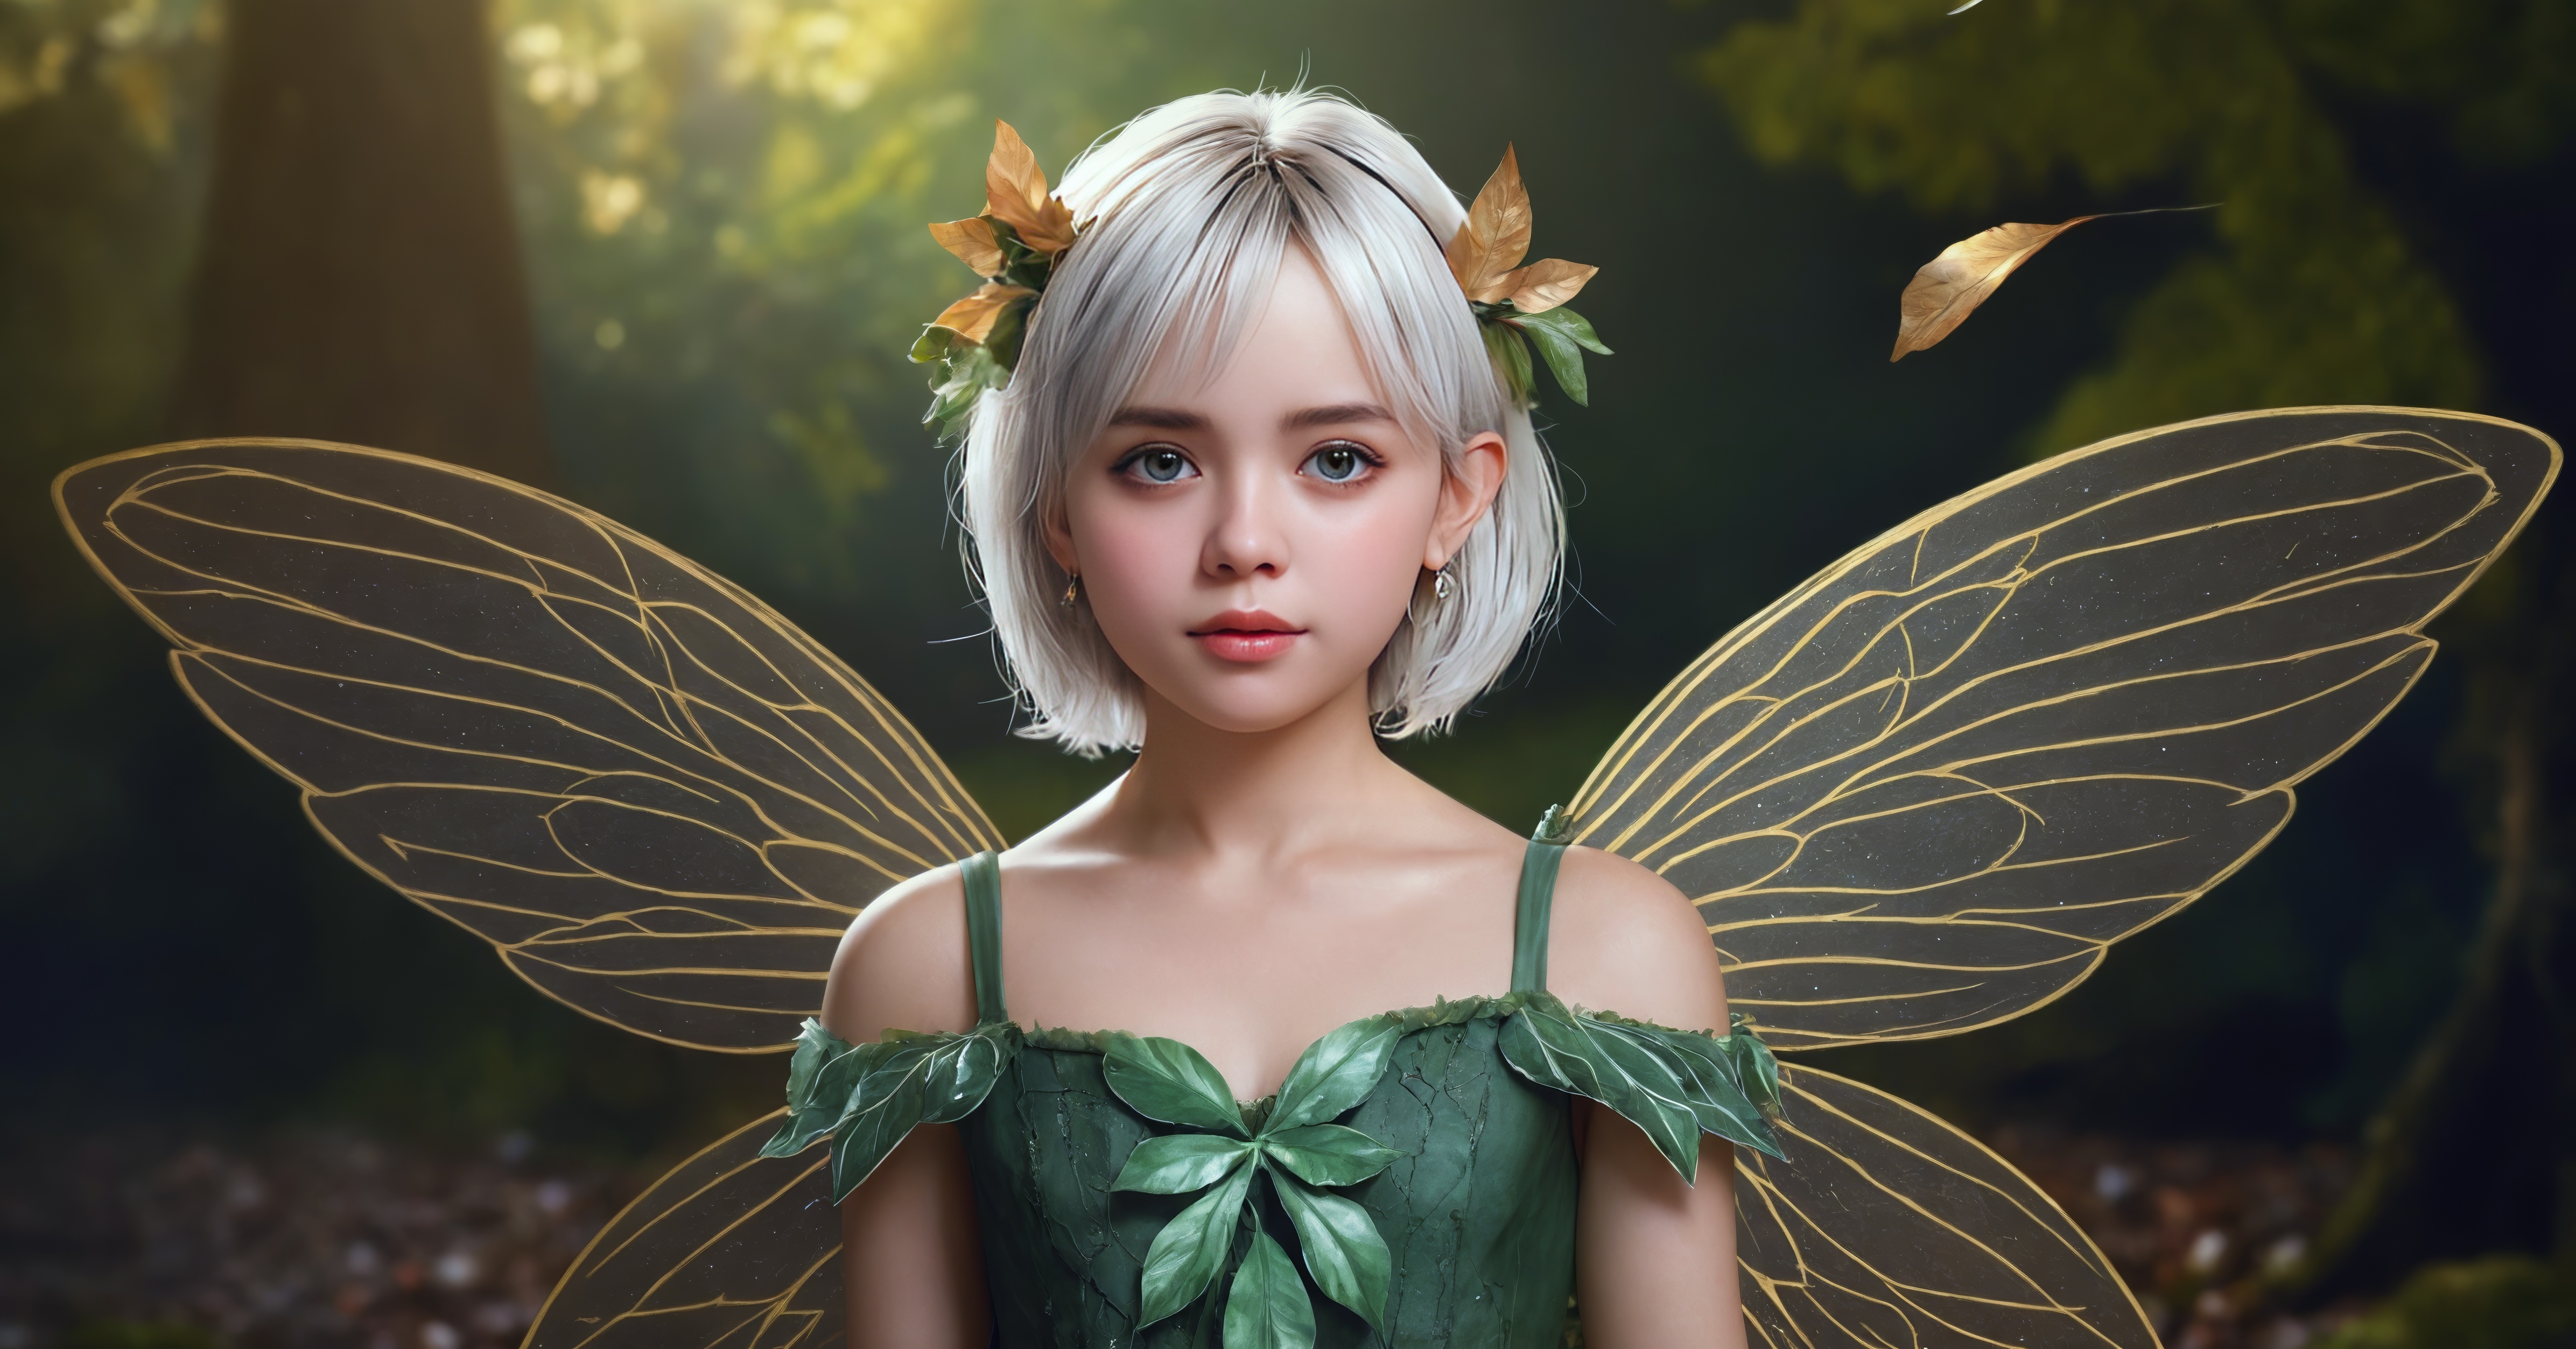 A young girl with white hair and an outfit made from fairy leaves